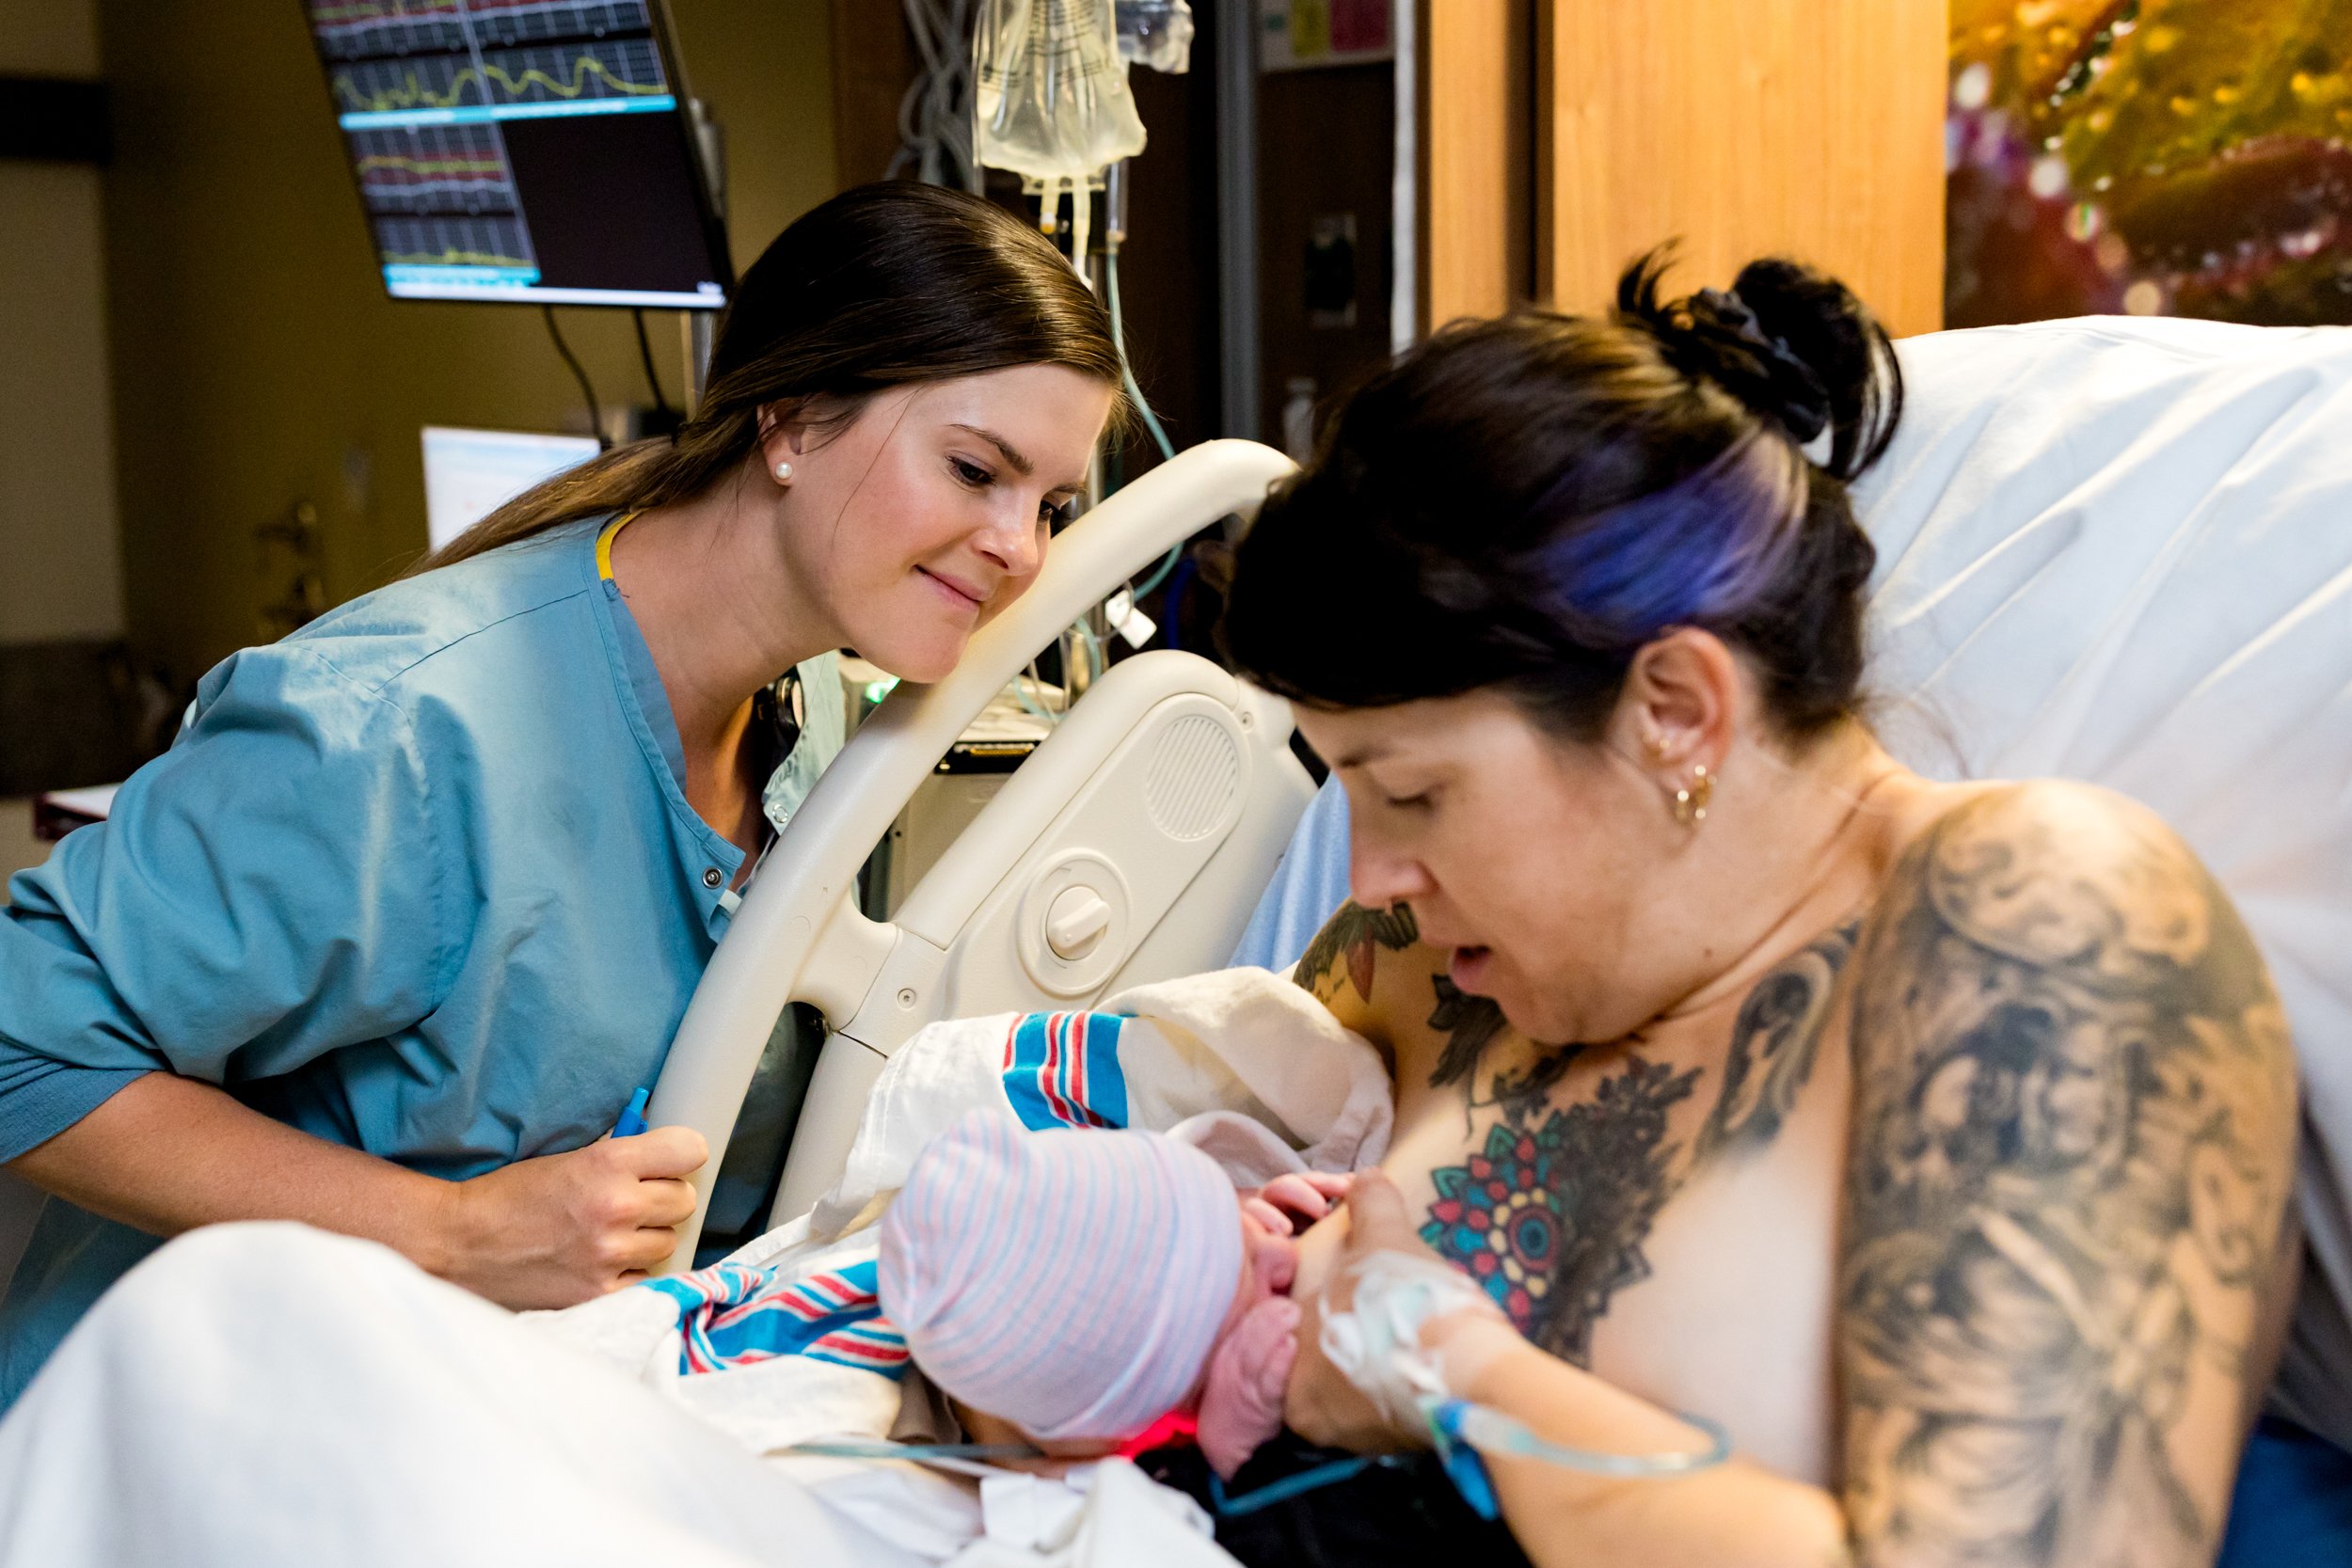 nurse looking on as baby latches for the first time